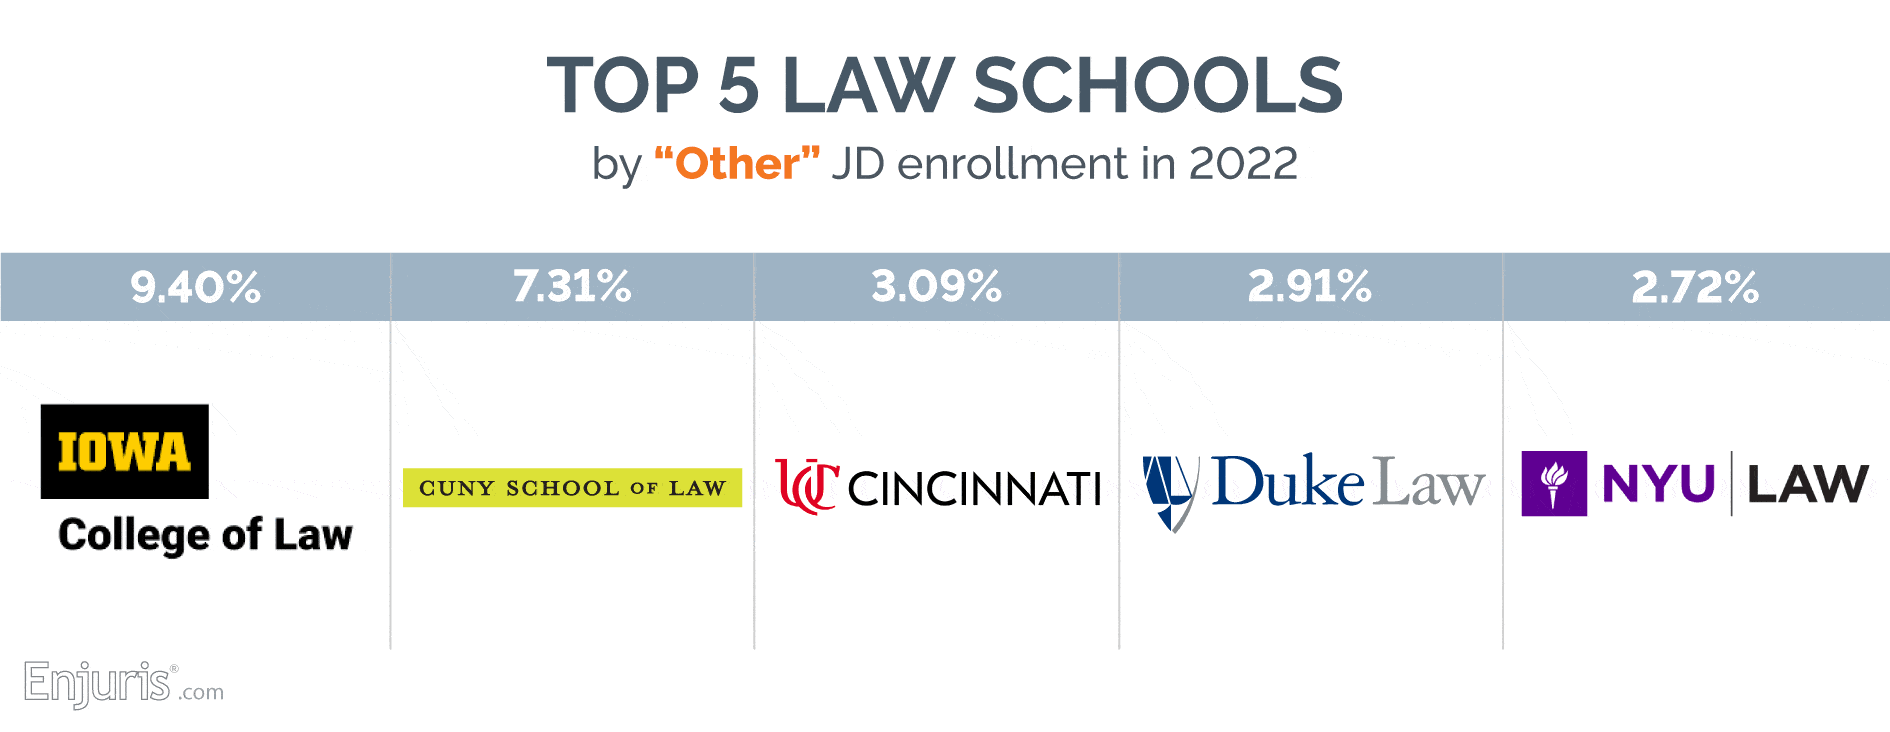 Top 5 law schools by “other” JD enrollment in 2022